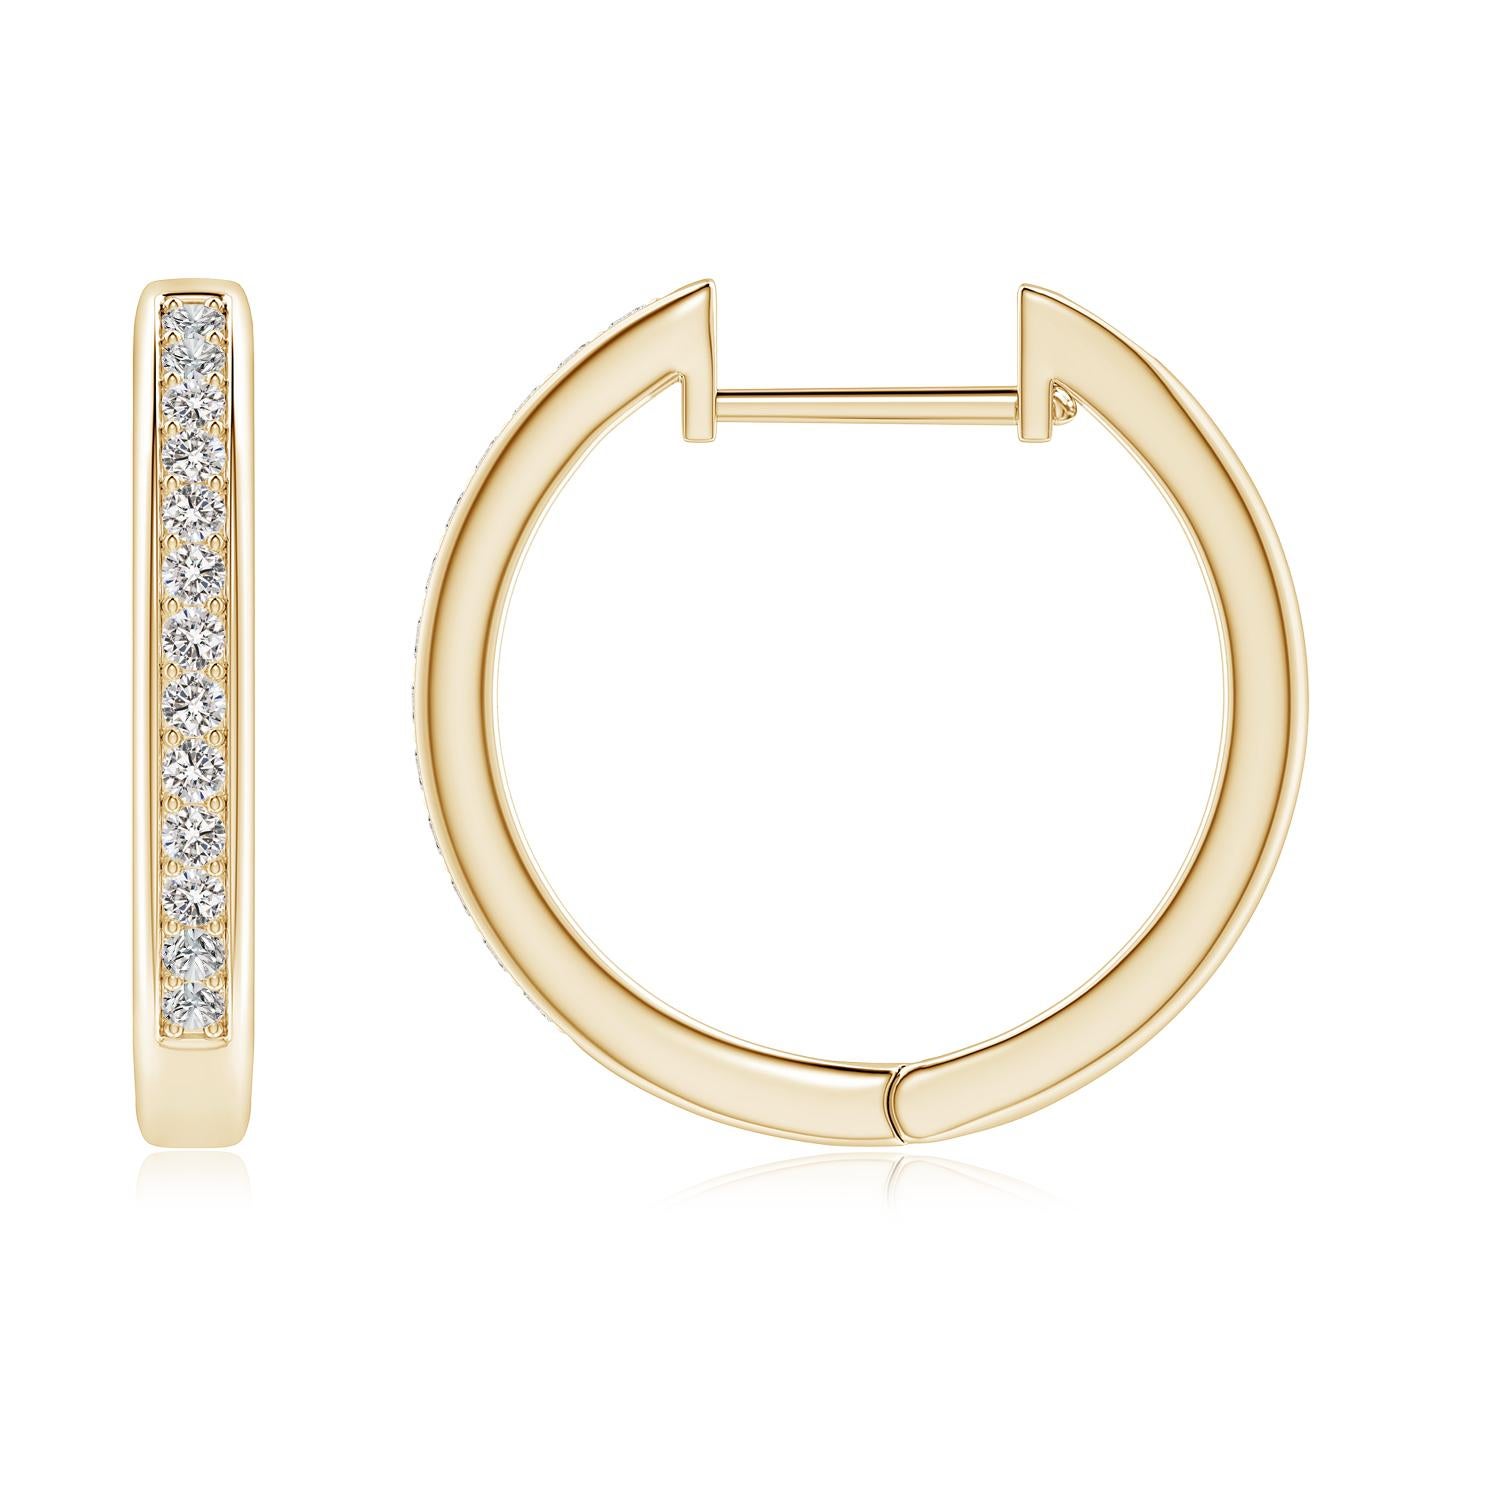 Round Cut Natural Diamond Hoop Earrings in 14K Yellow Gold 0.33cttw Color-I-J Clarity-I1I2 For Sale